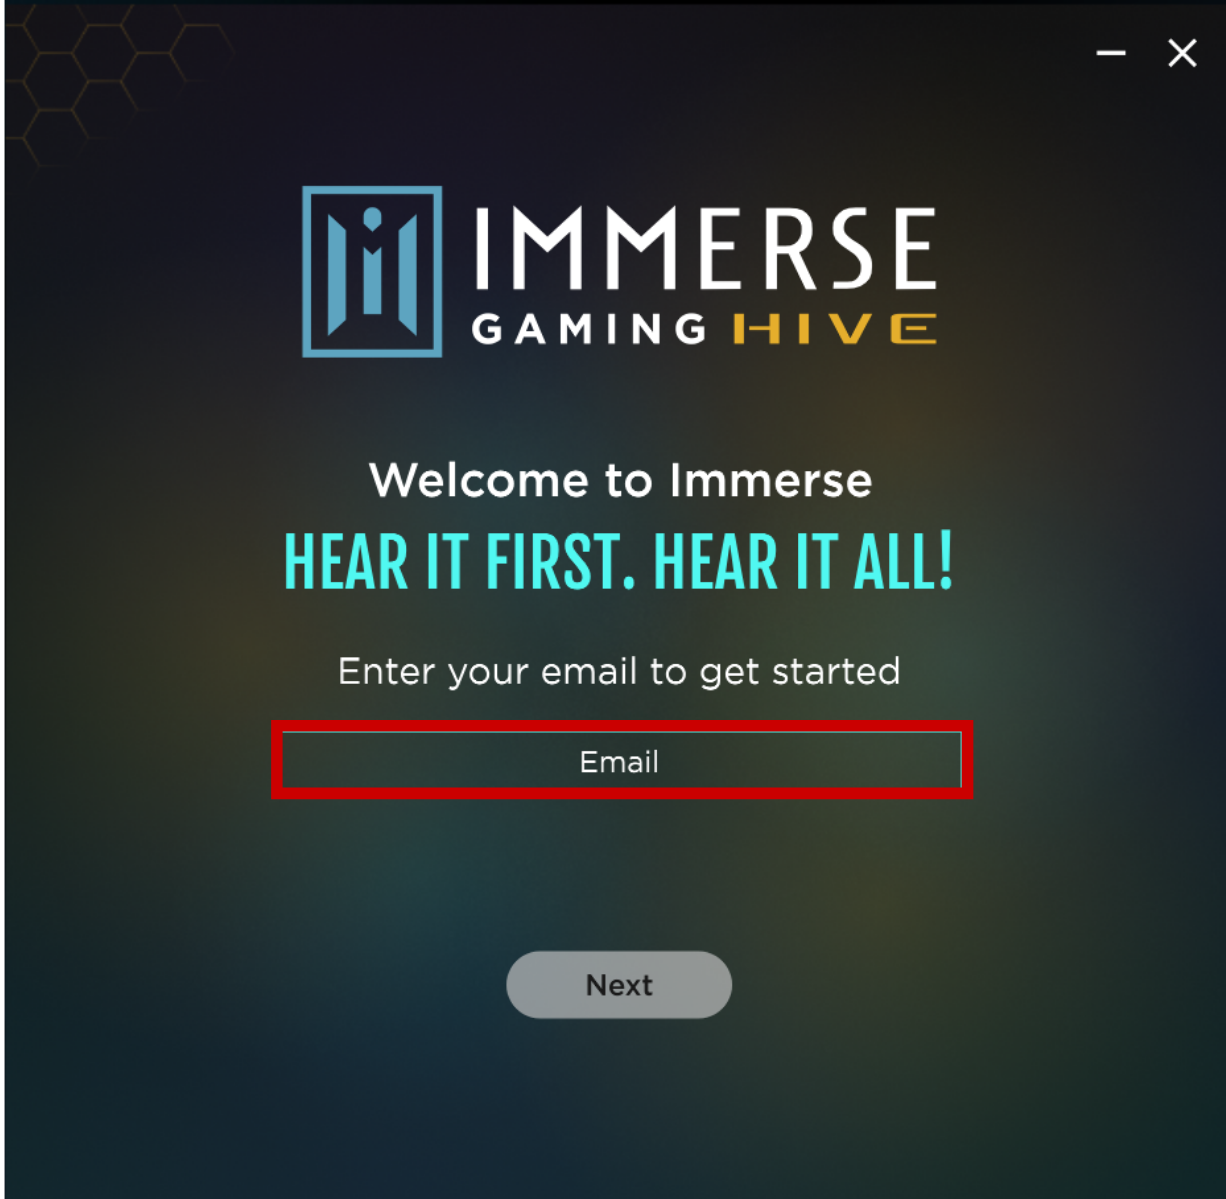 Immerse_Gaming_Hive_email_address_page.png